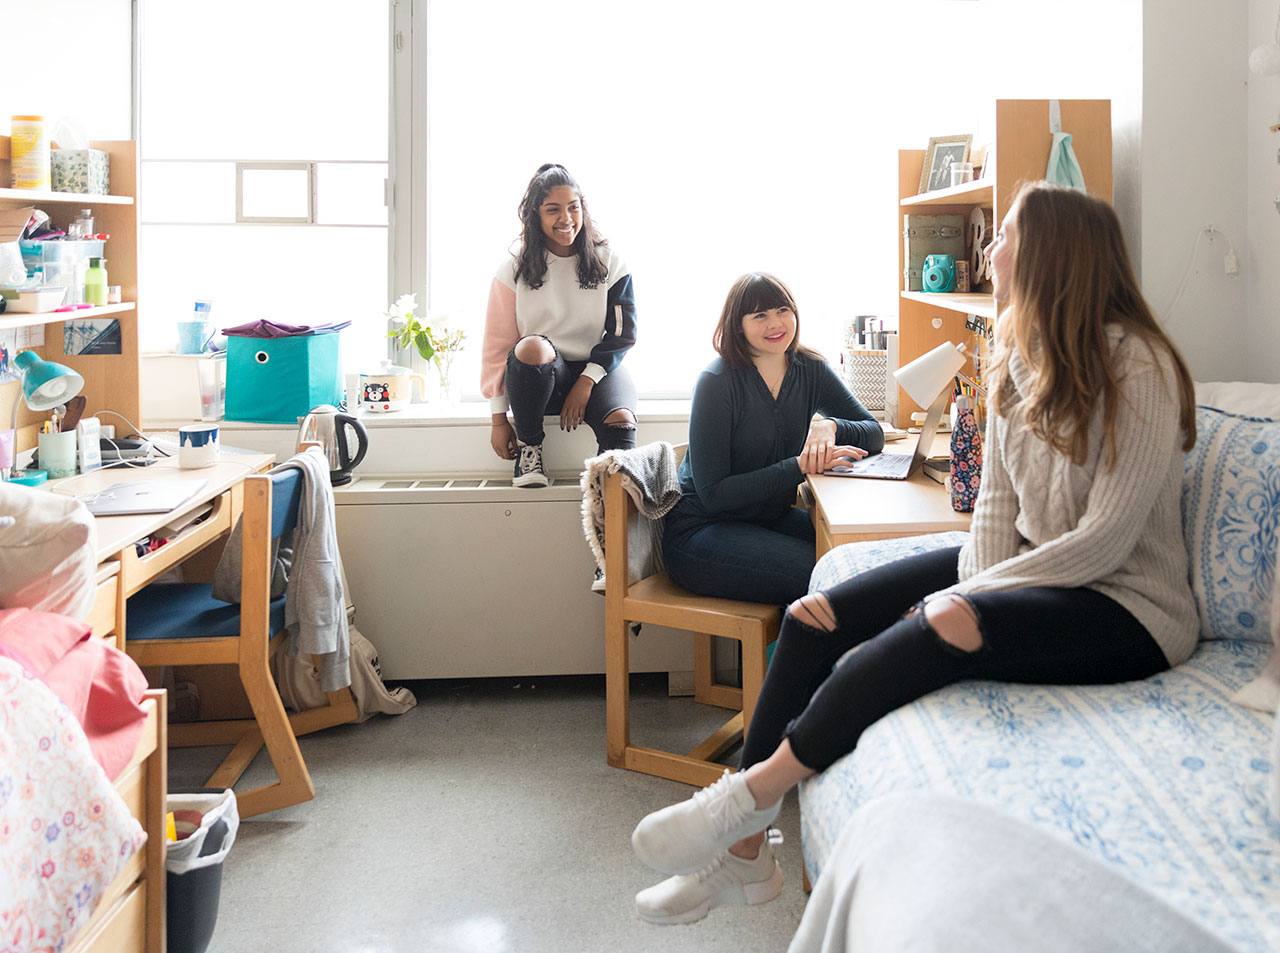 Three students hanging out in an NYU dorm room.